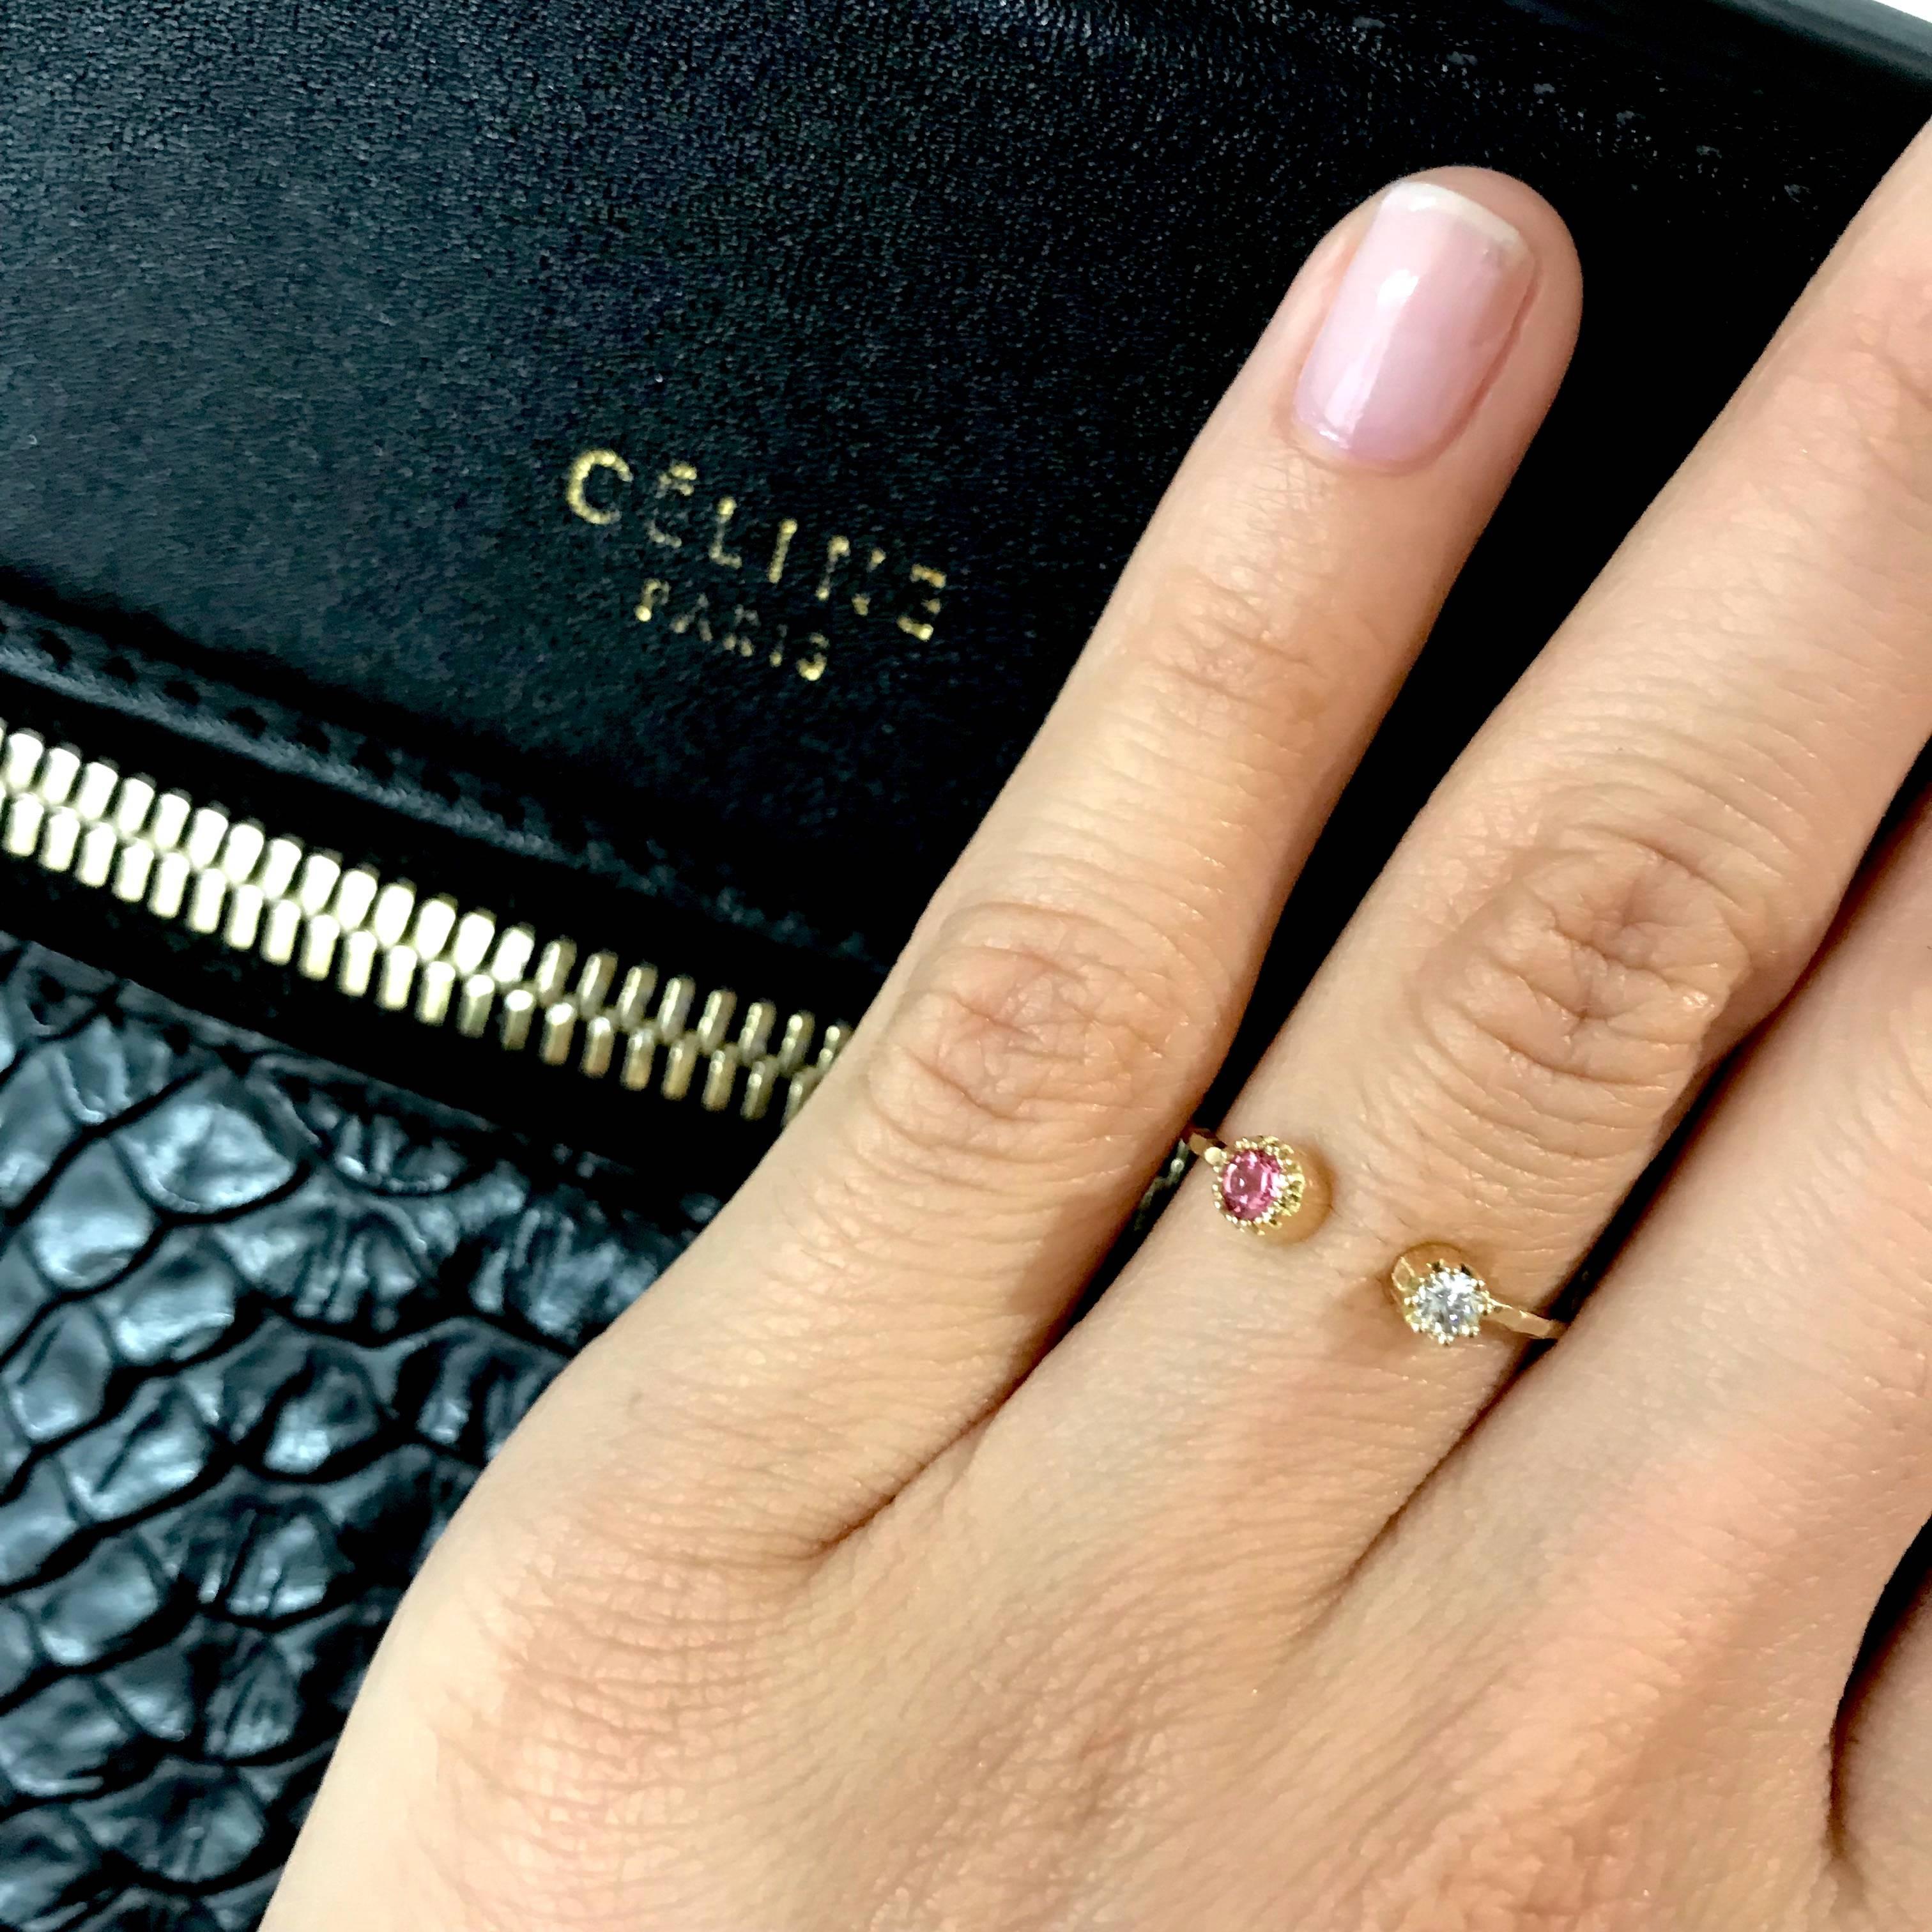 This delicate open ring features a diamond on one end, and a larger stone of the other, a pink tourmaline. However, the larger stone can be the stone and color of your choice, just make sure to tell us in the comments at checkout.   

The opening